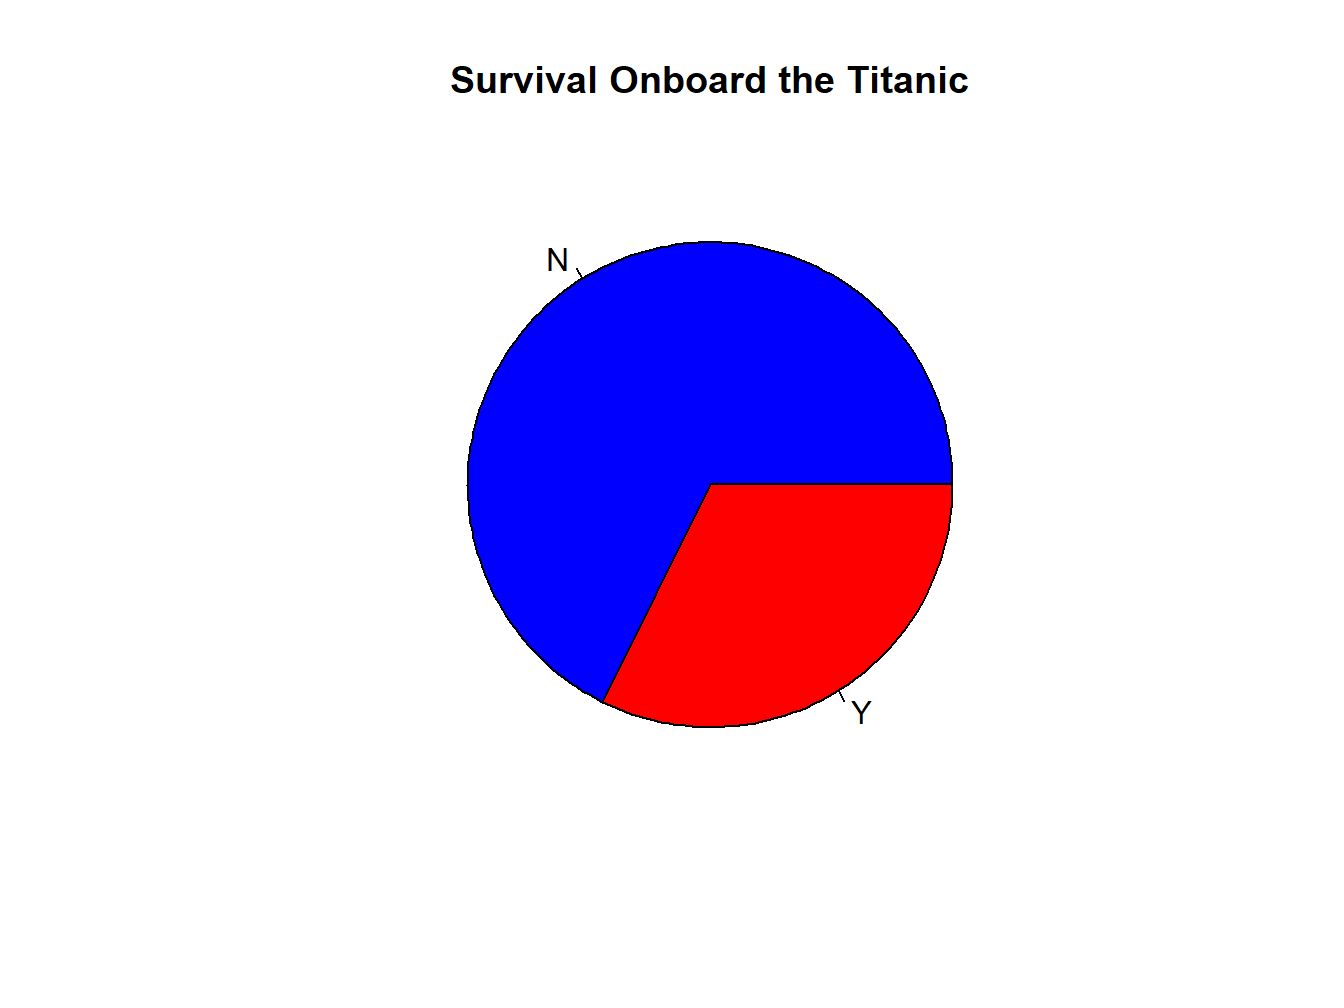 A Colored Pie Chart